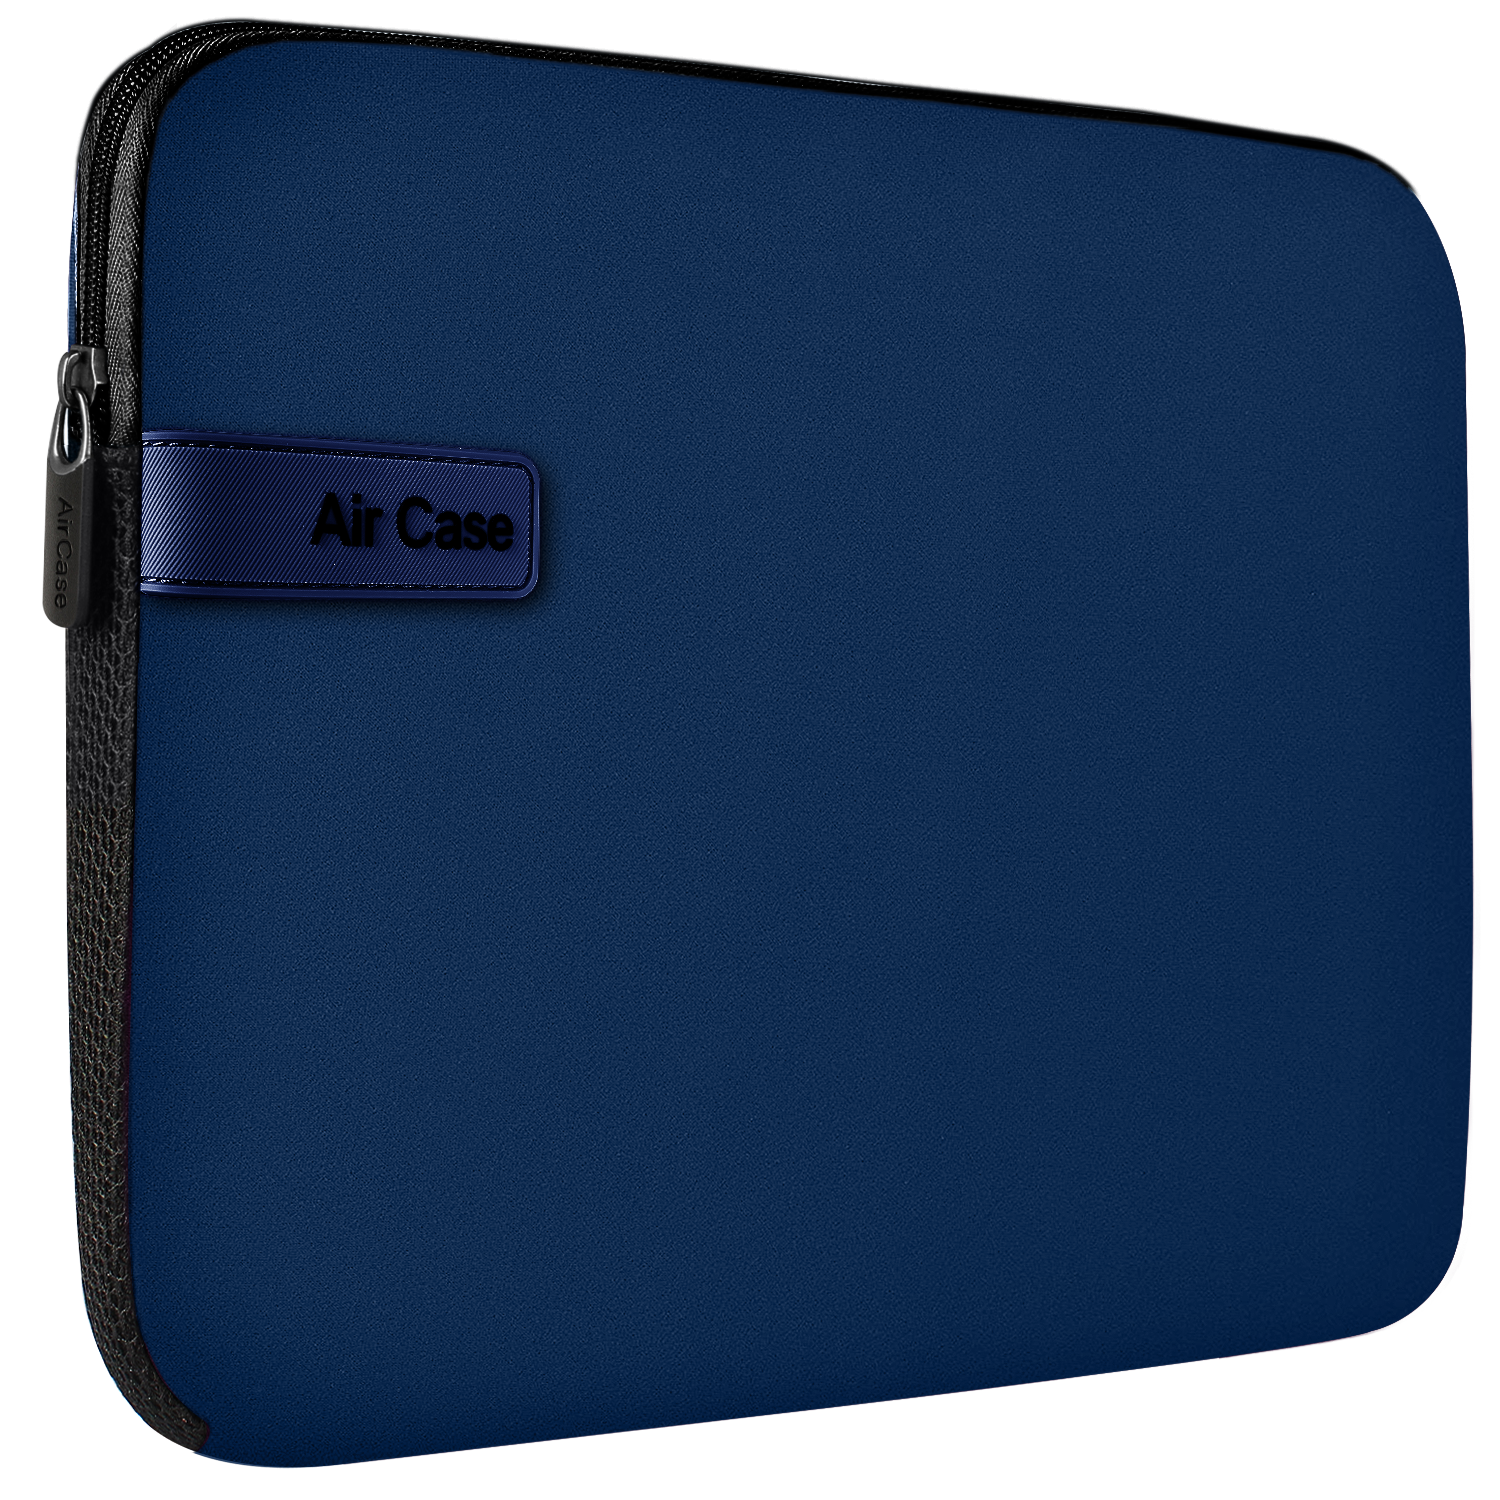 AirCase Laptop Bag Cover fits Upto 12.5